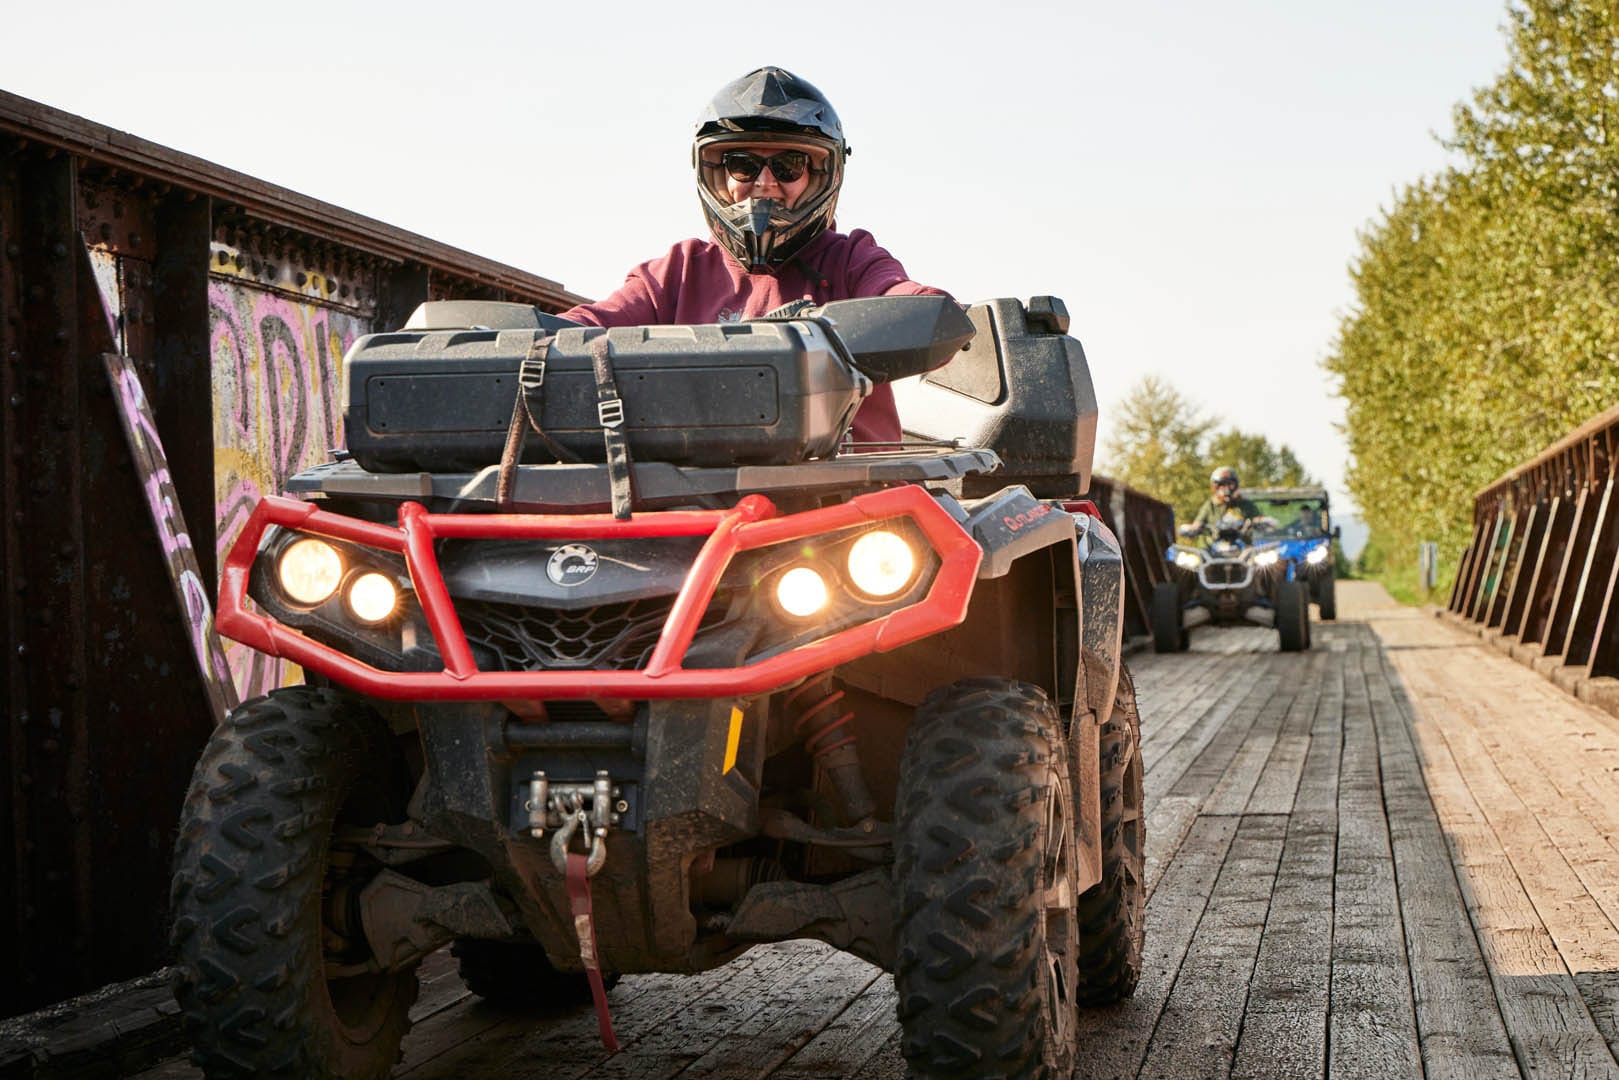 A woman smiles at the camera as she passes in her red UTV.